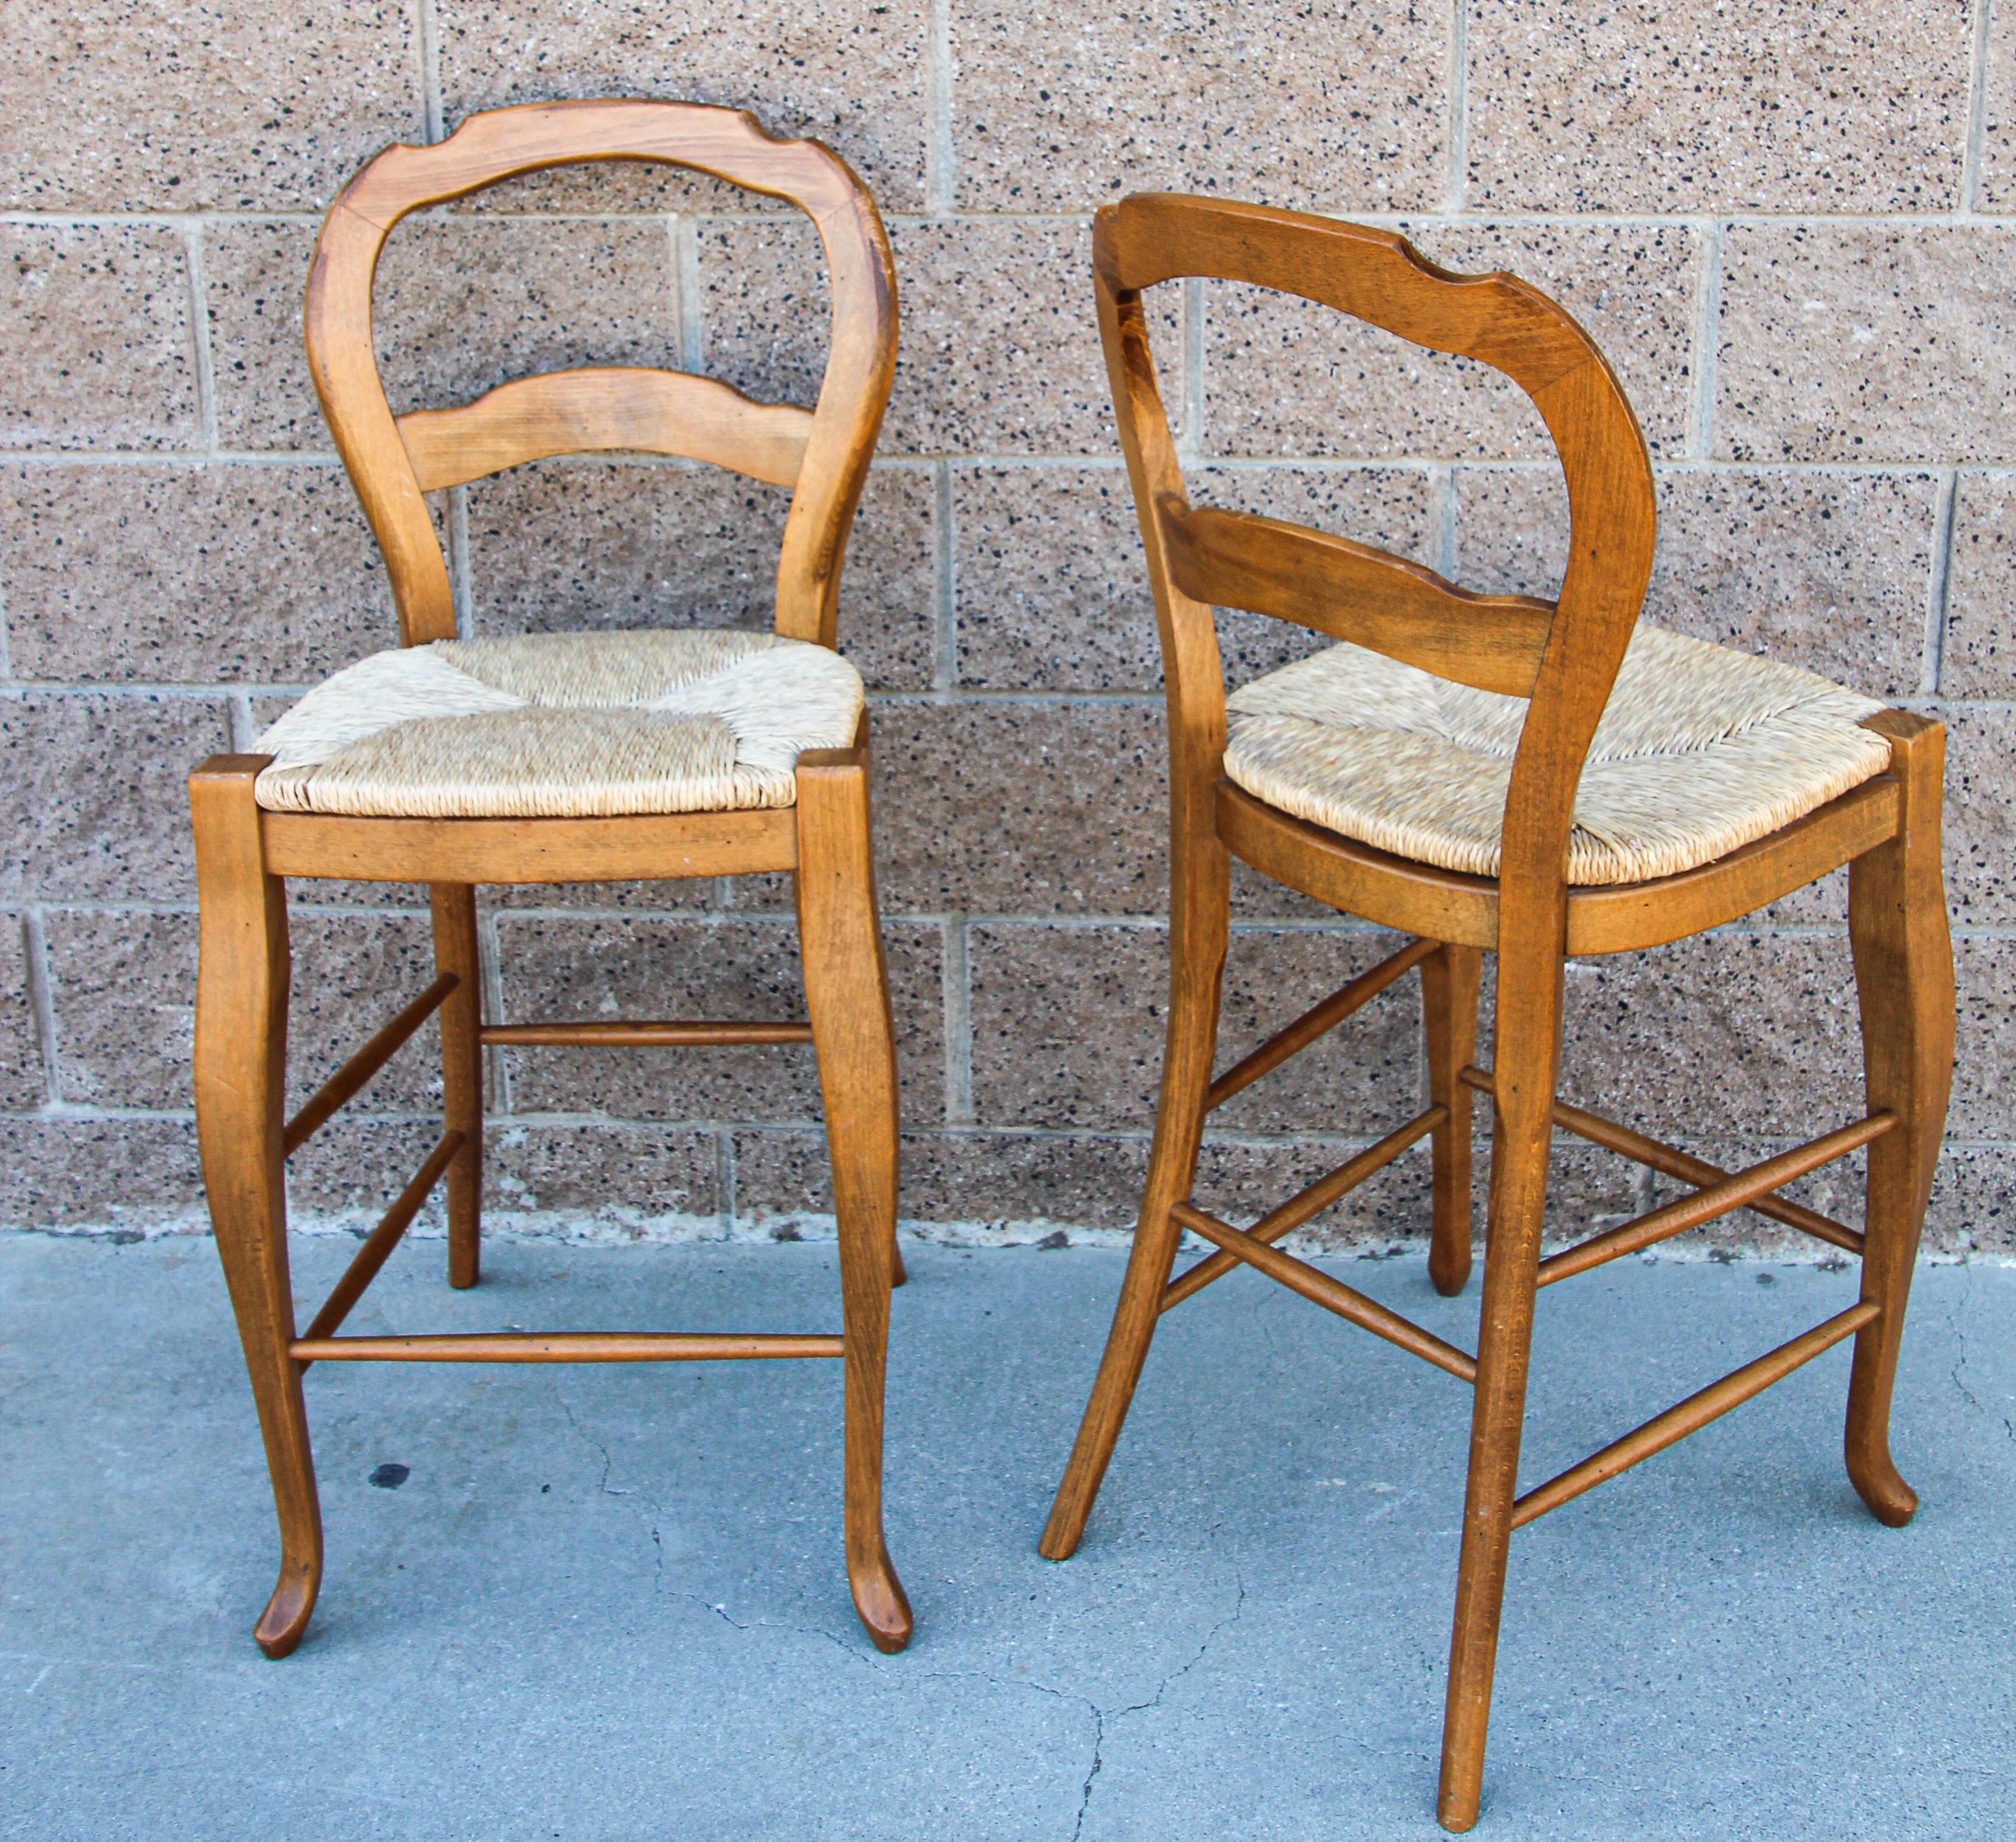 20th Century Pair of French Provincial Country Wooden Bar Stools with Rushed Seats